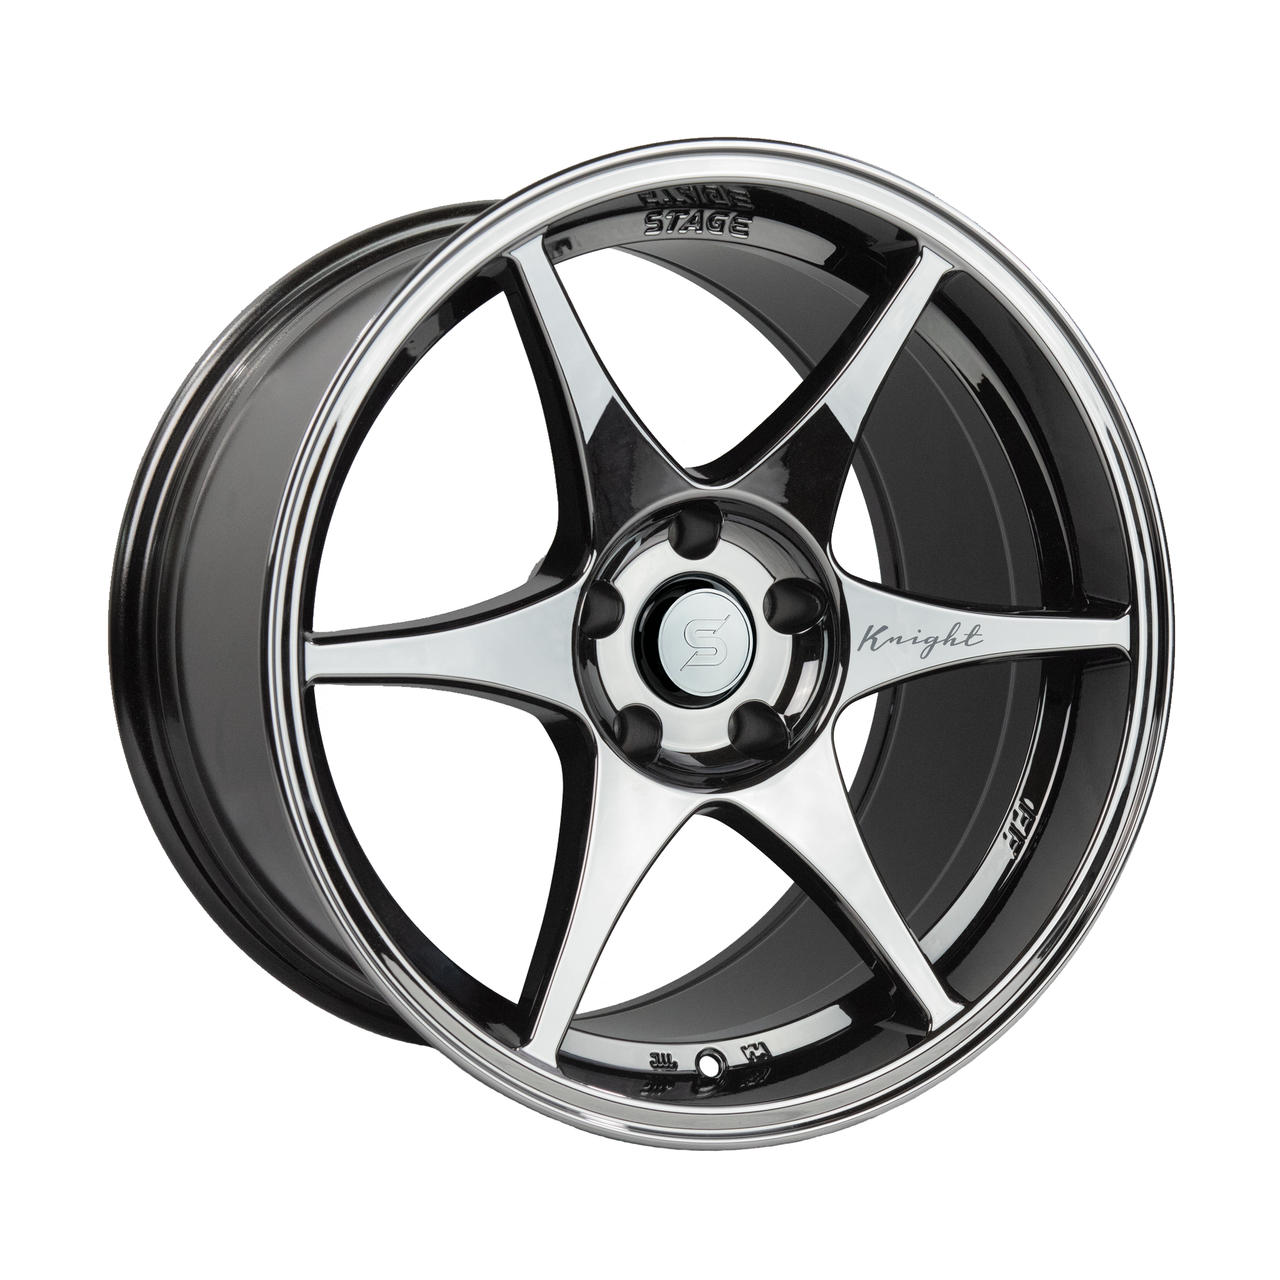 "Knight" style wheel in Black Chrome by Stage Wheels